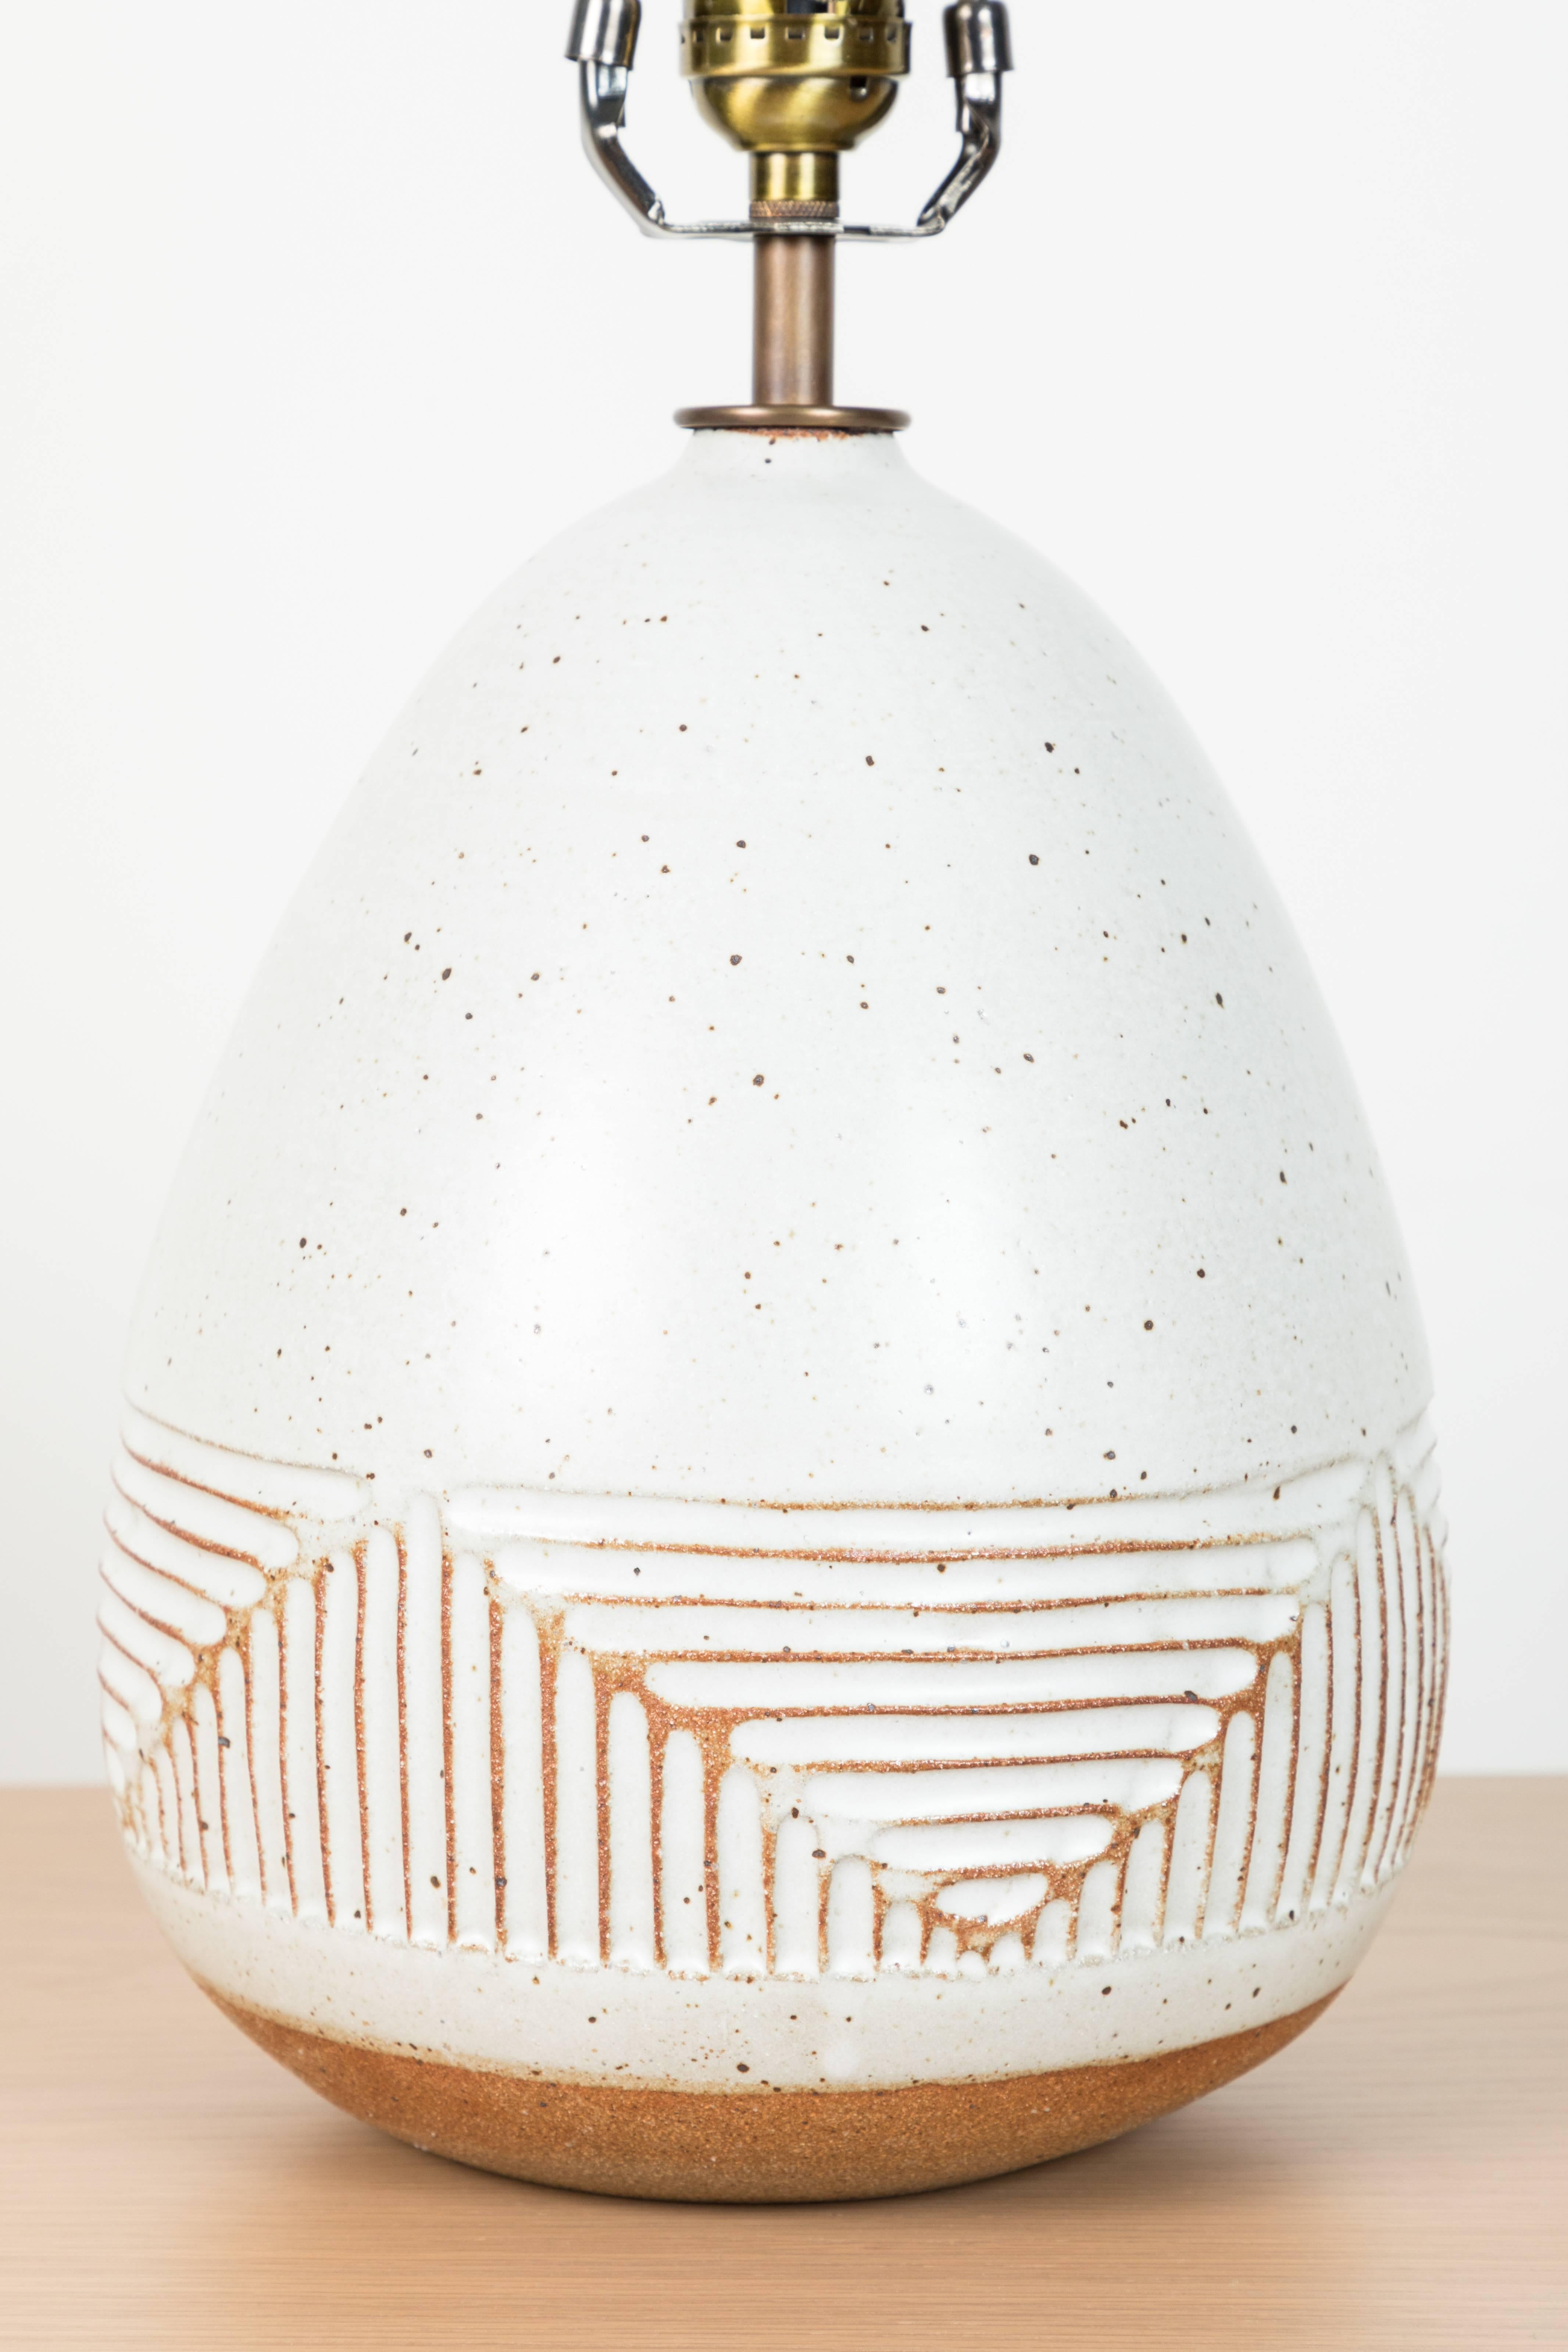 American Hand-Carved Ceramic Lamp by Mt. Washington Pottery